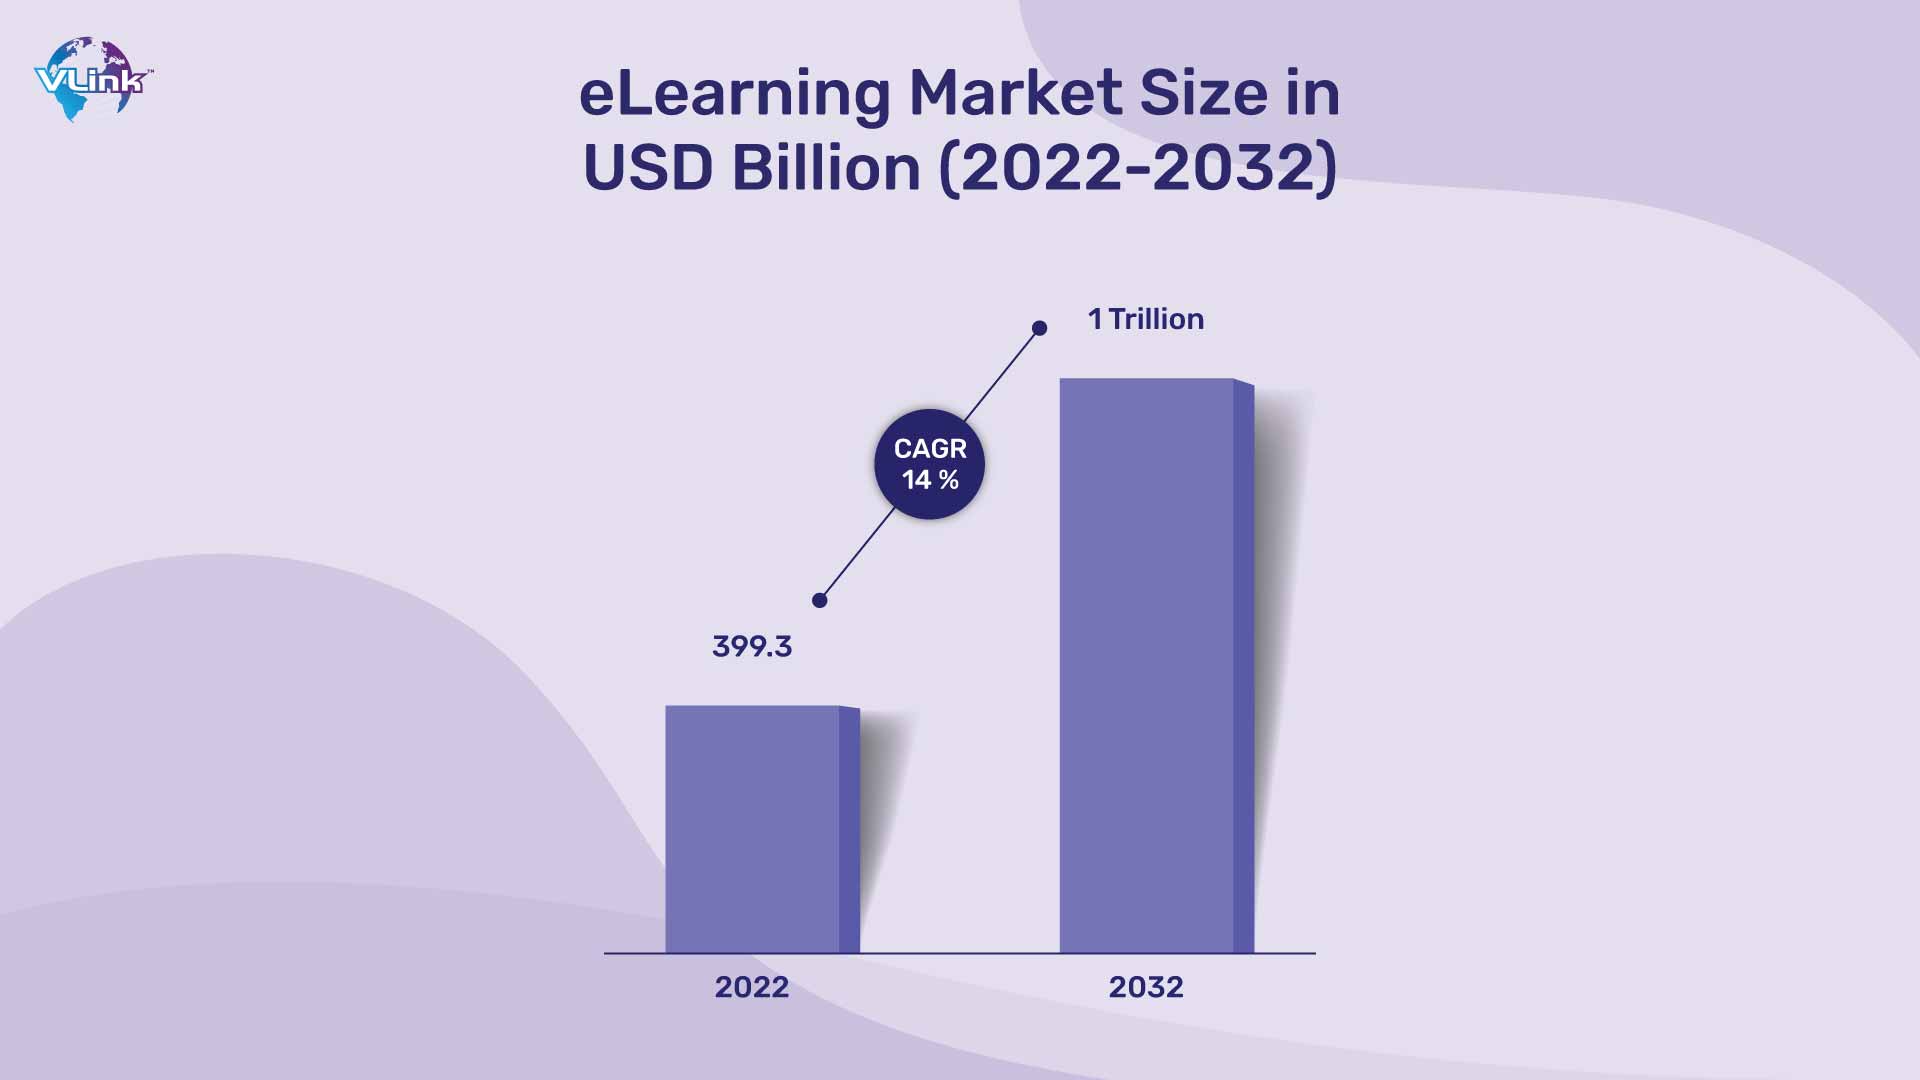 global Online Self-Paced Learning market